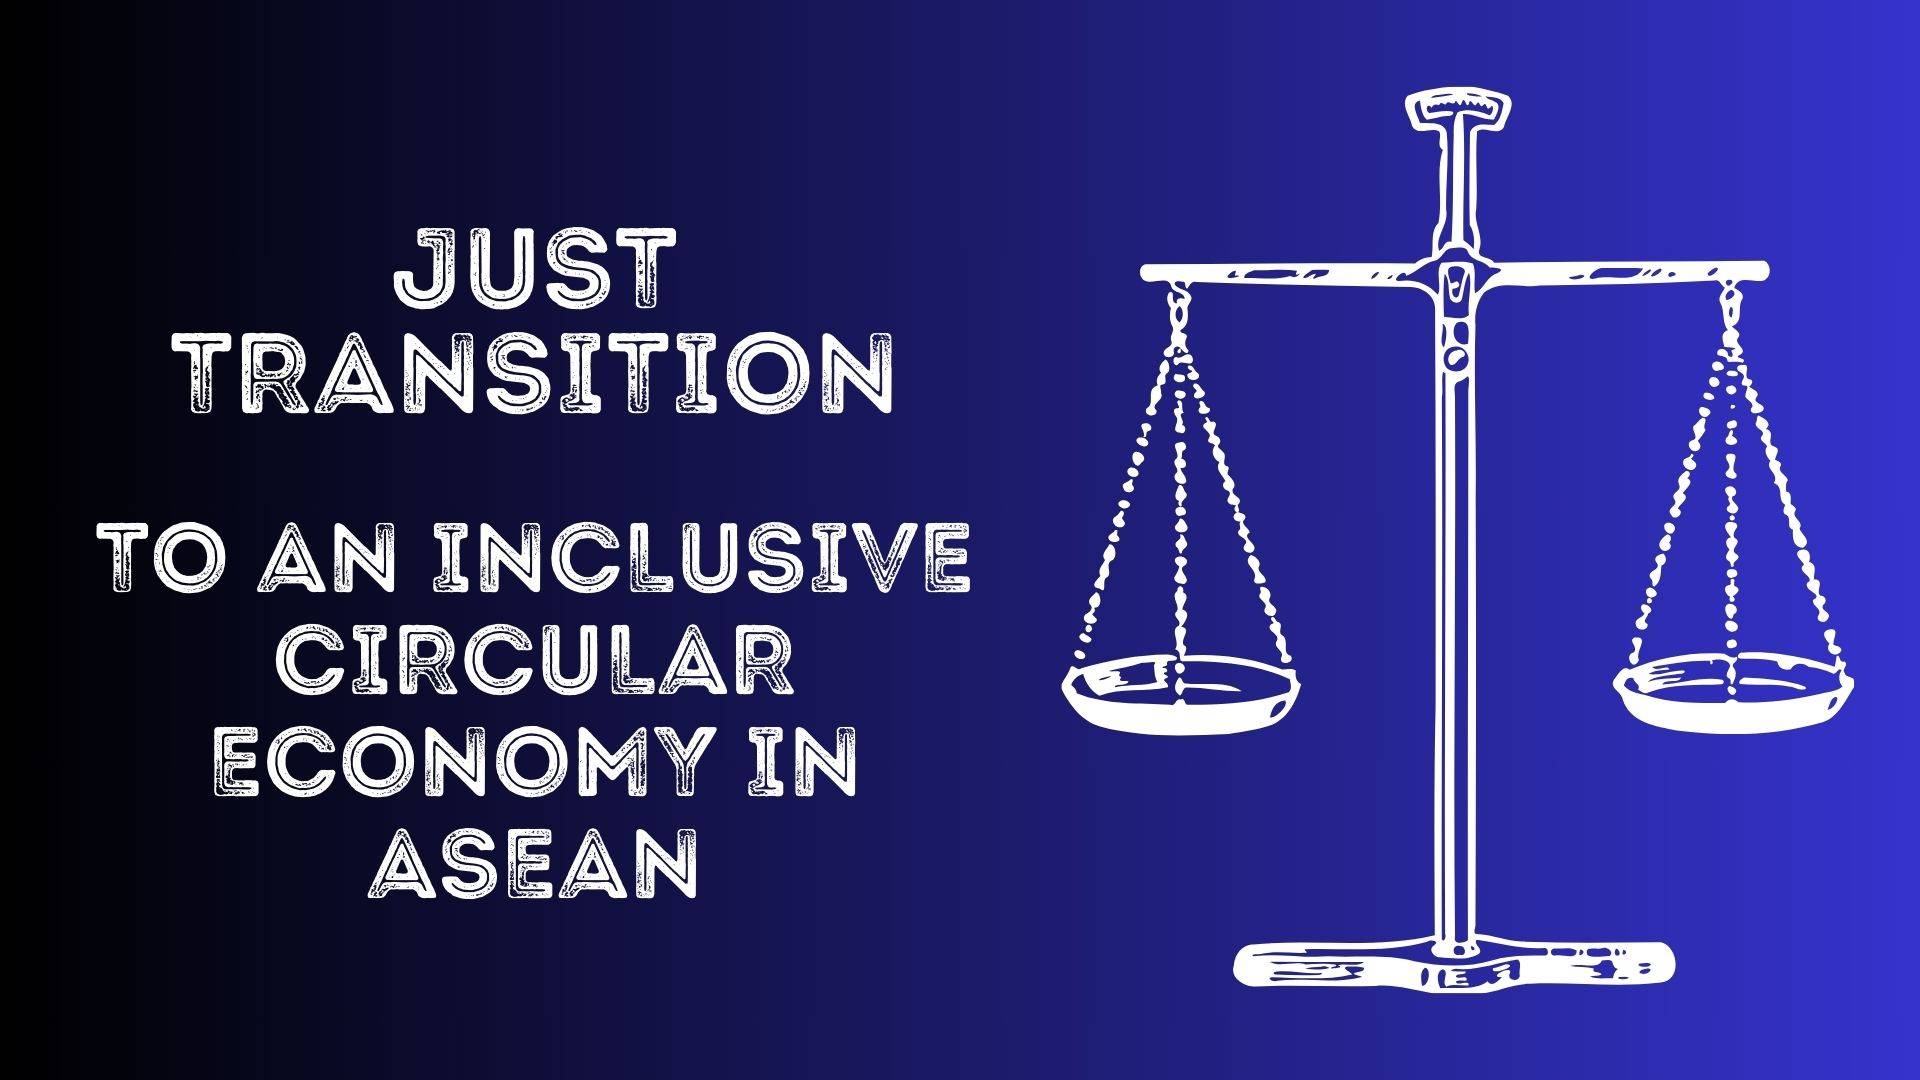 Just Transition to an Inclusive Circular Economy in ASEAN